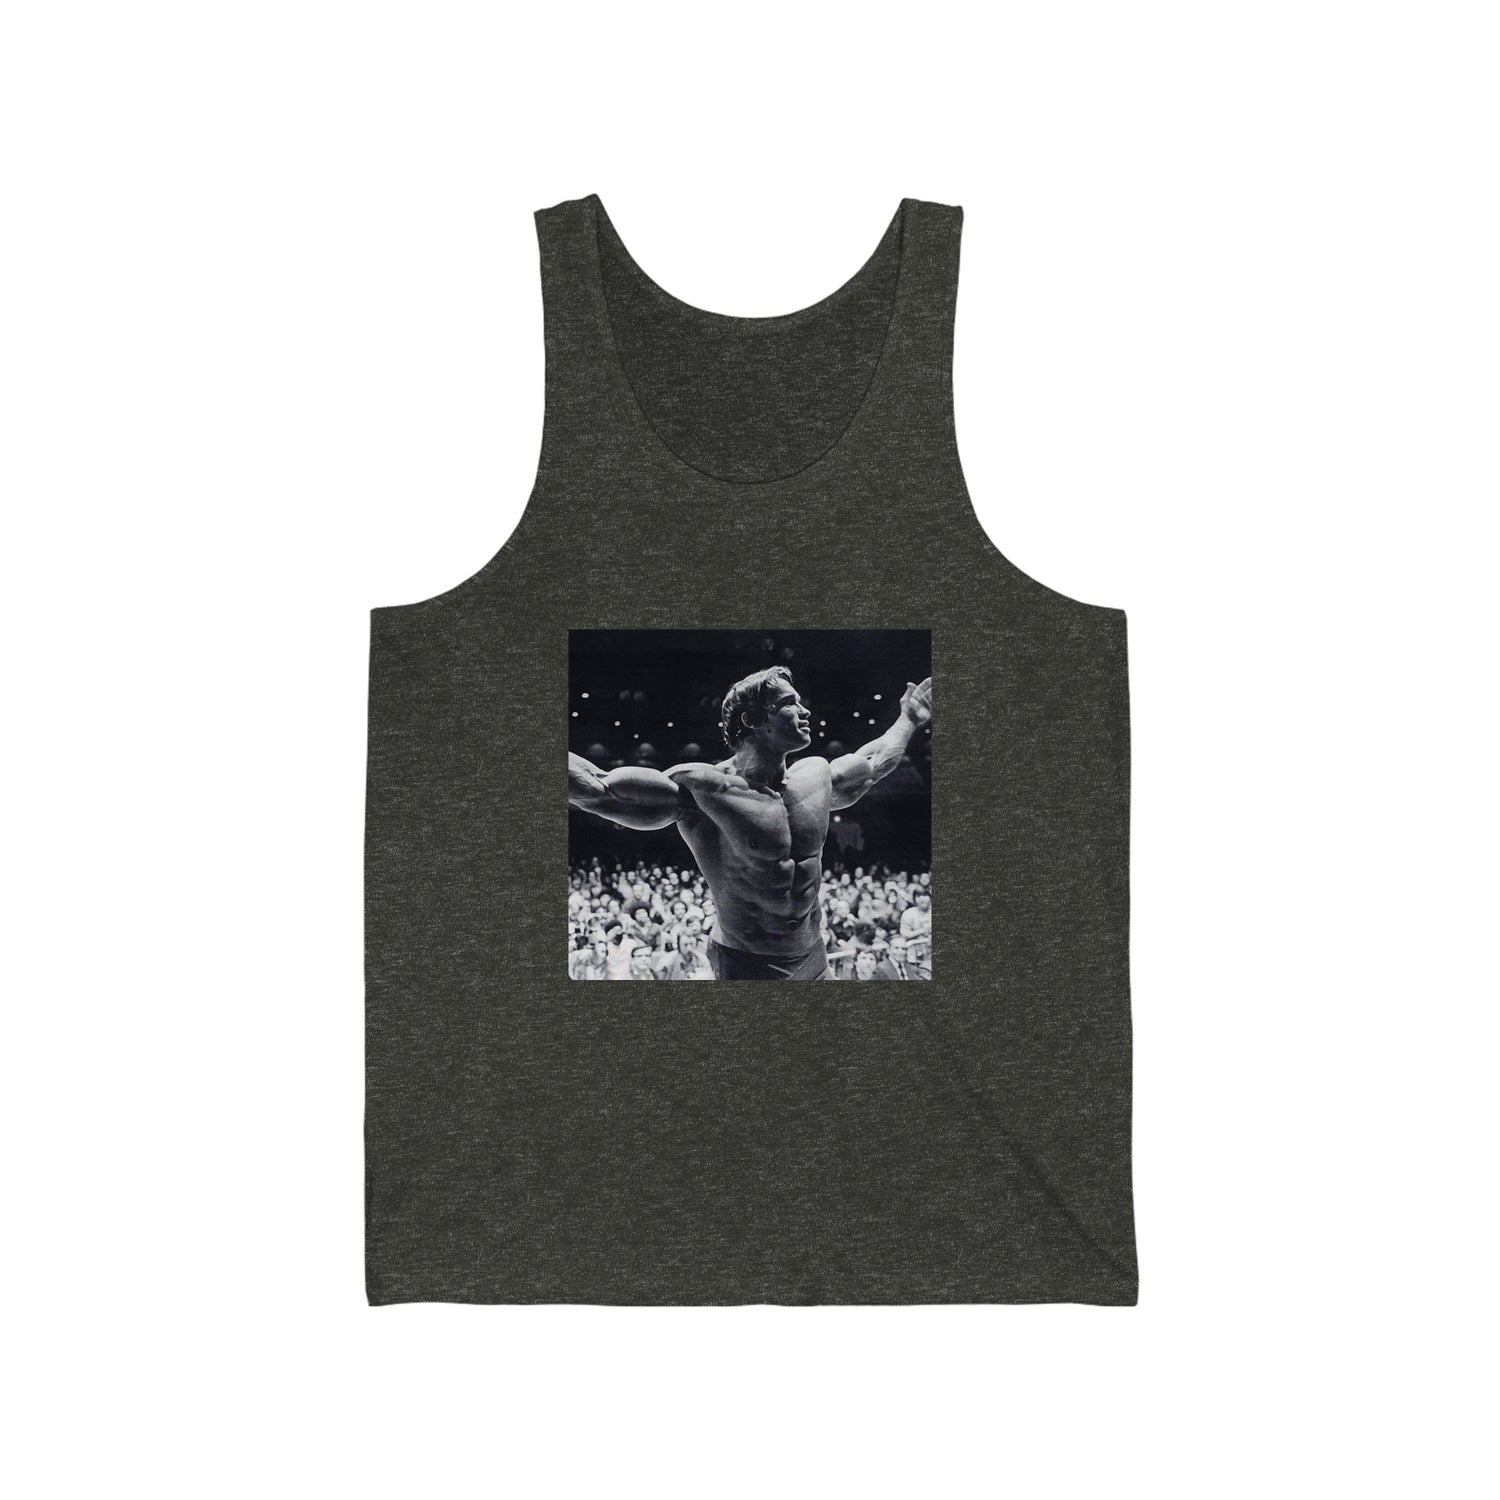 The Arnold 6 Rules Muscle Tank Top